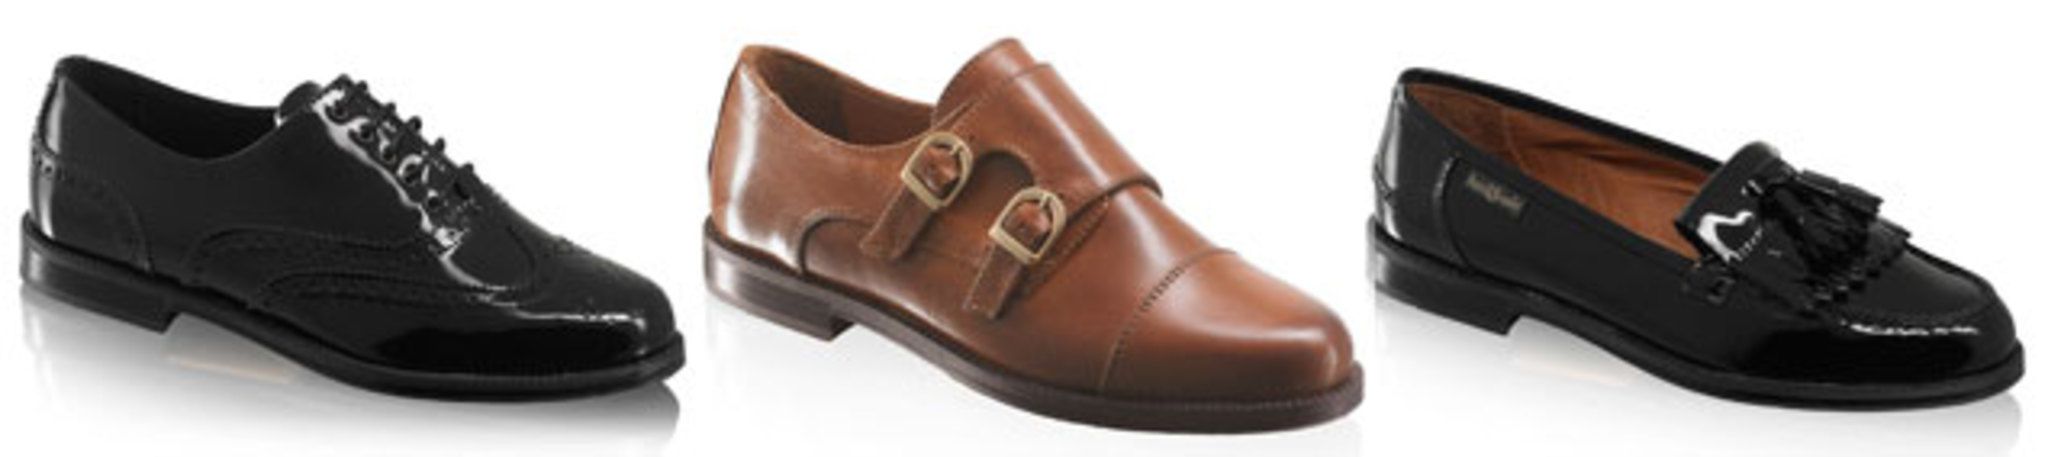 russell and bromley alexa loafers